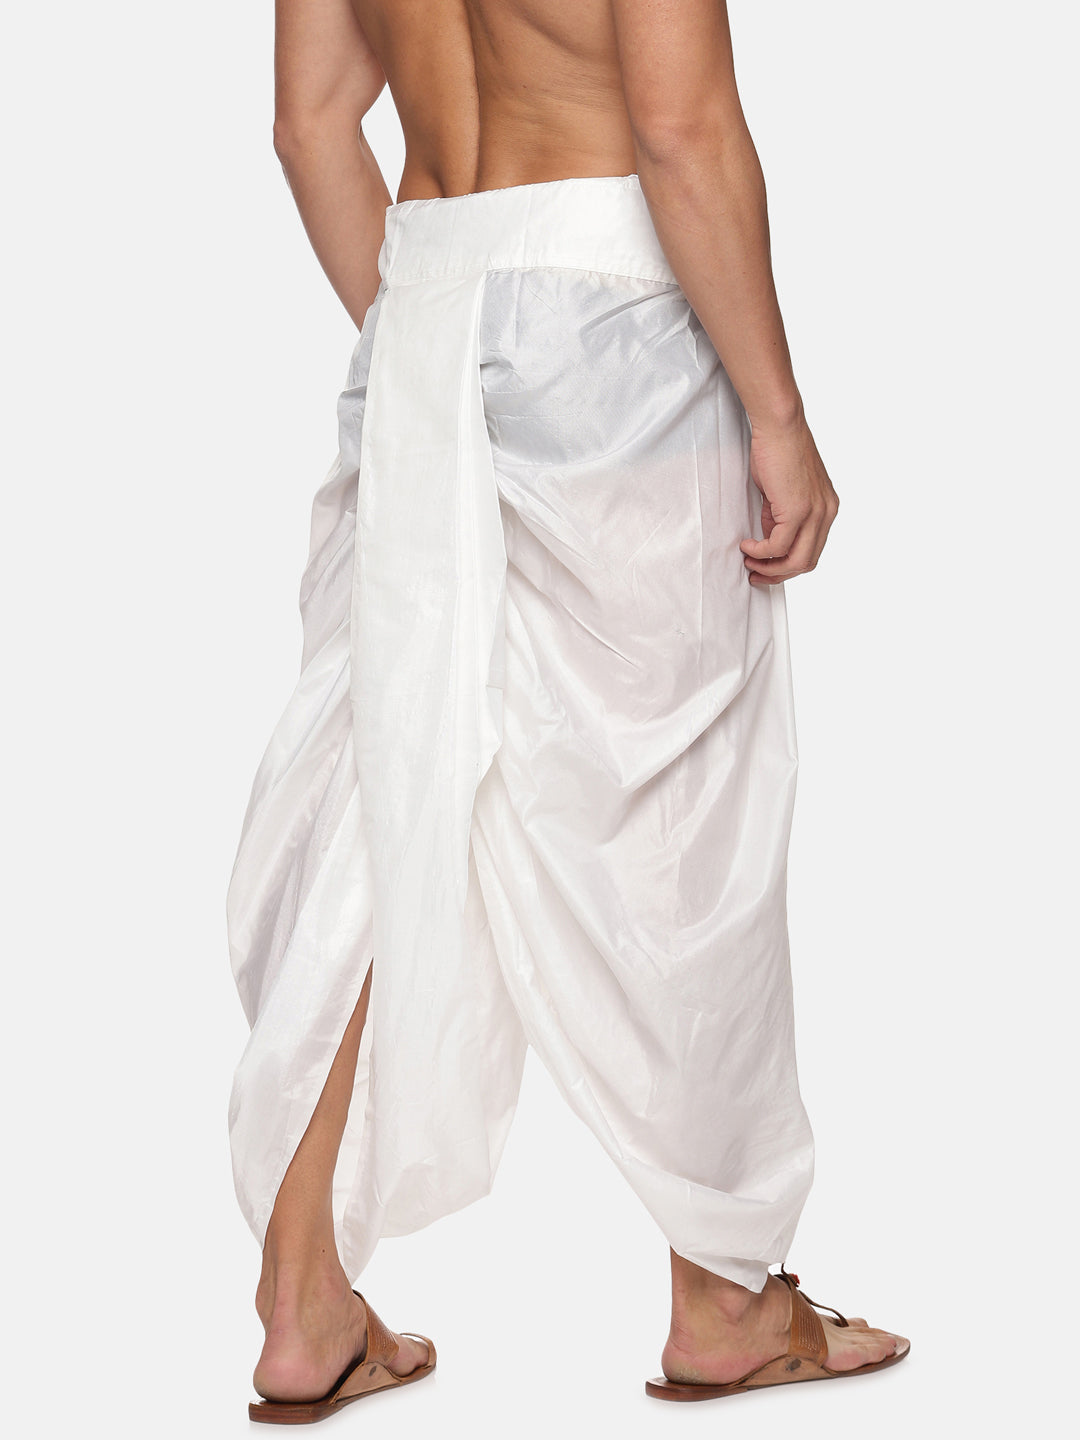 Polyester Comfort Fit White Best Comfortable Fabric Formal MenS Cotton  Trousers at Best Price in Imphal  Nikhil Store